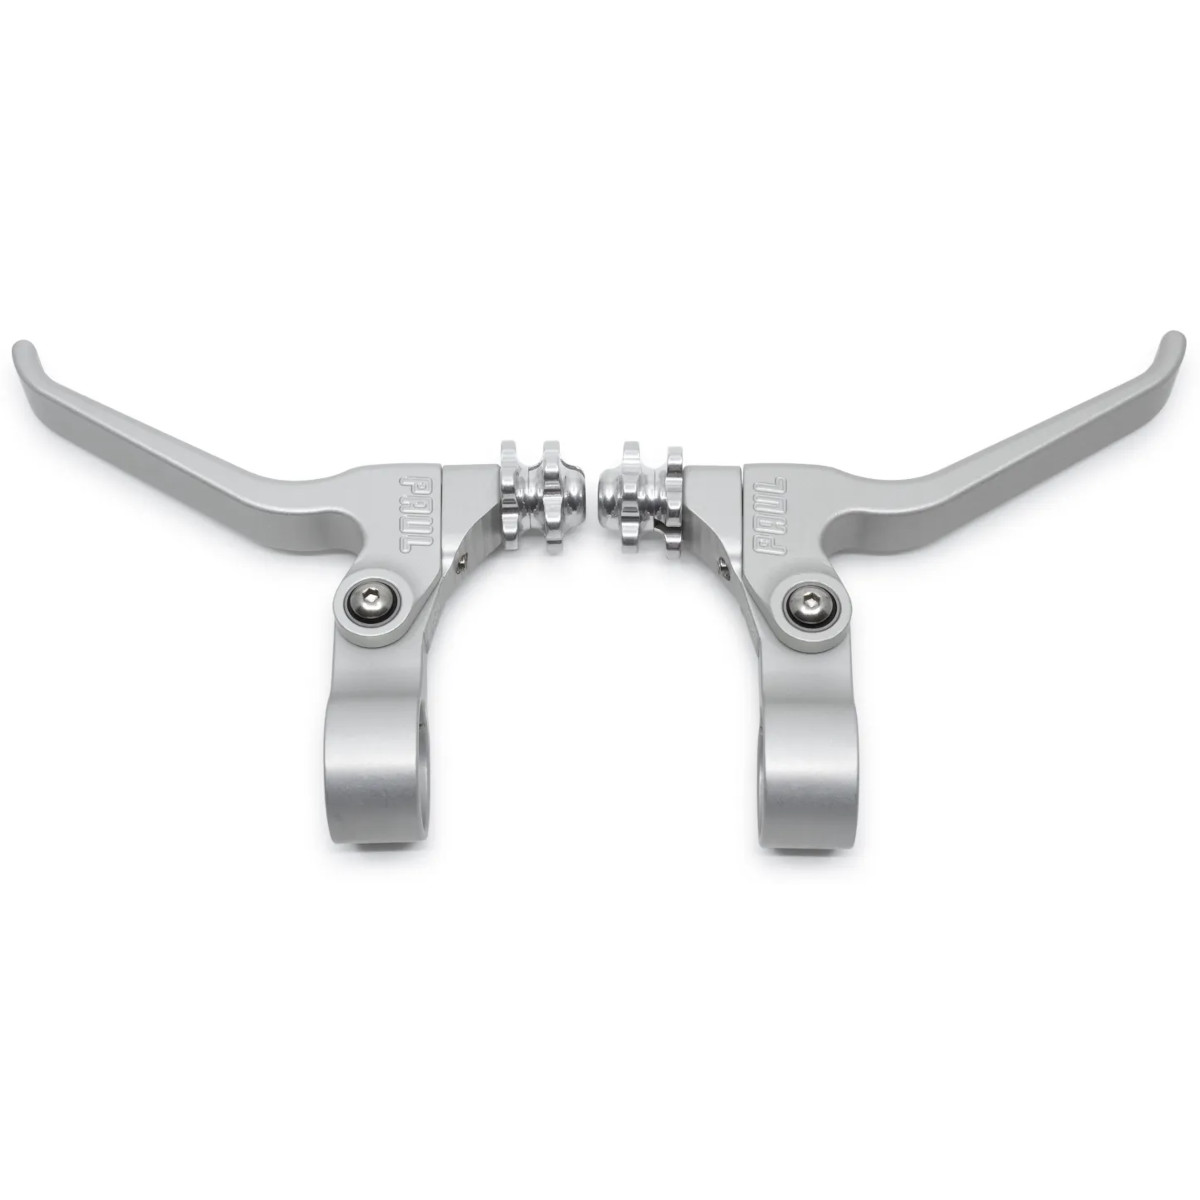 Picture of Paul Component Canti Lever Brake Levers - Pair - silver